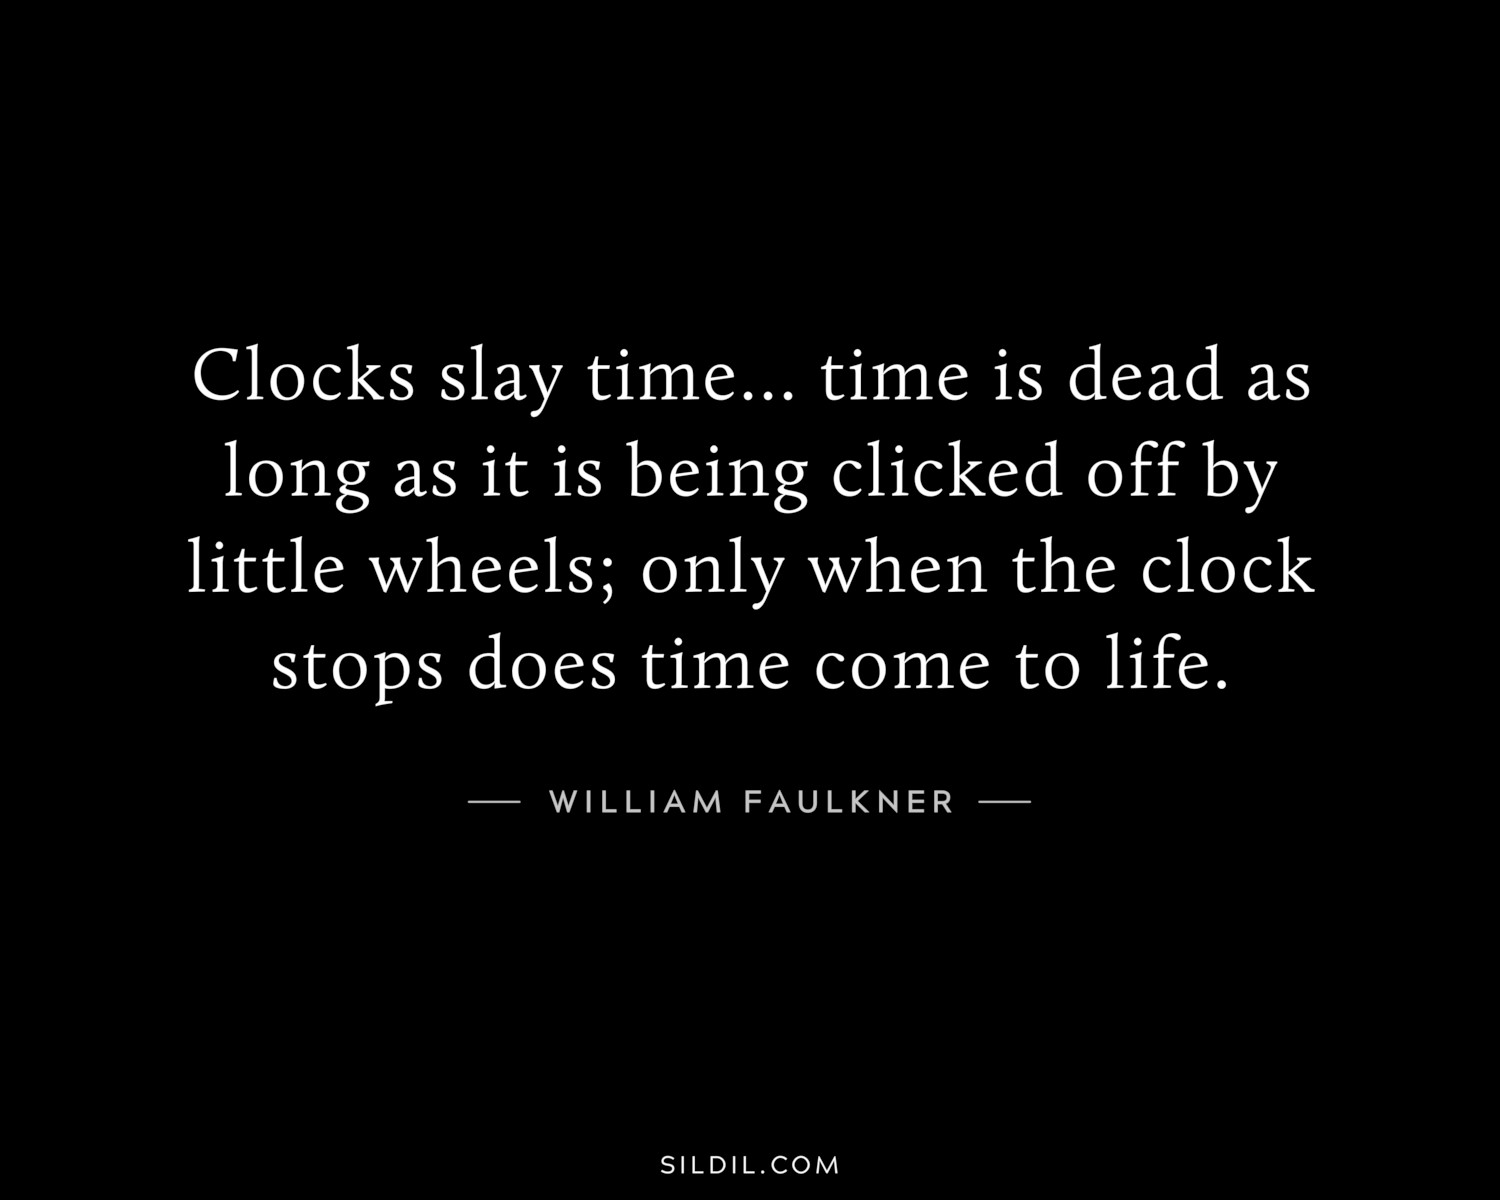 Clocks slay time... time is dead as long as it is being clicked off by little wheels; only when the clock stops does time come to life.